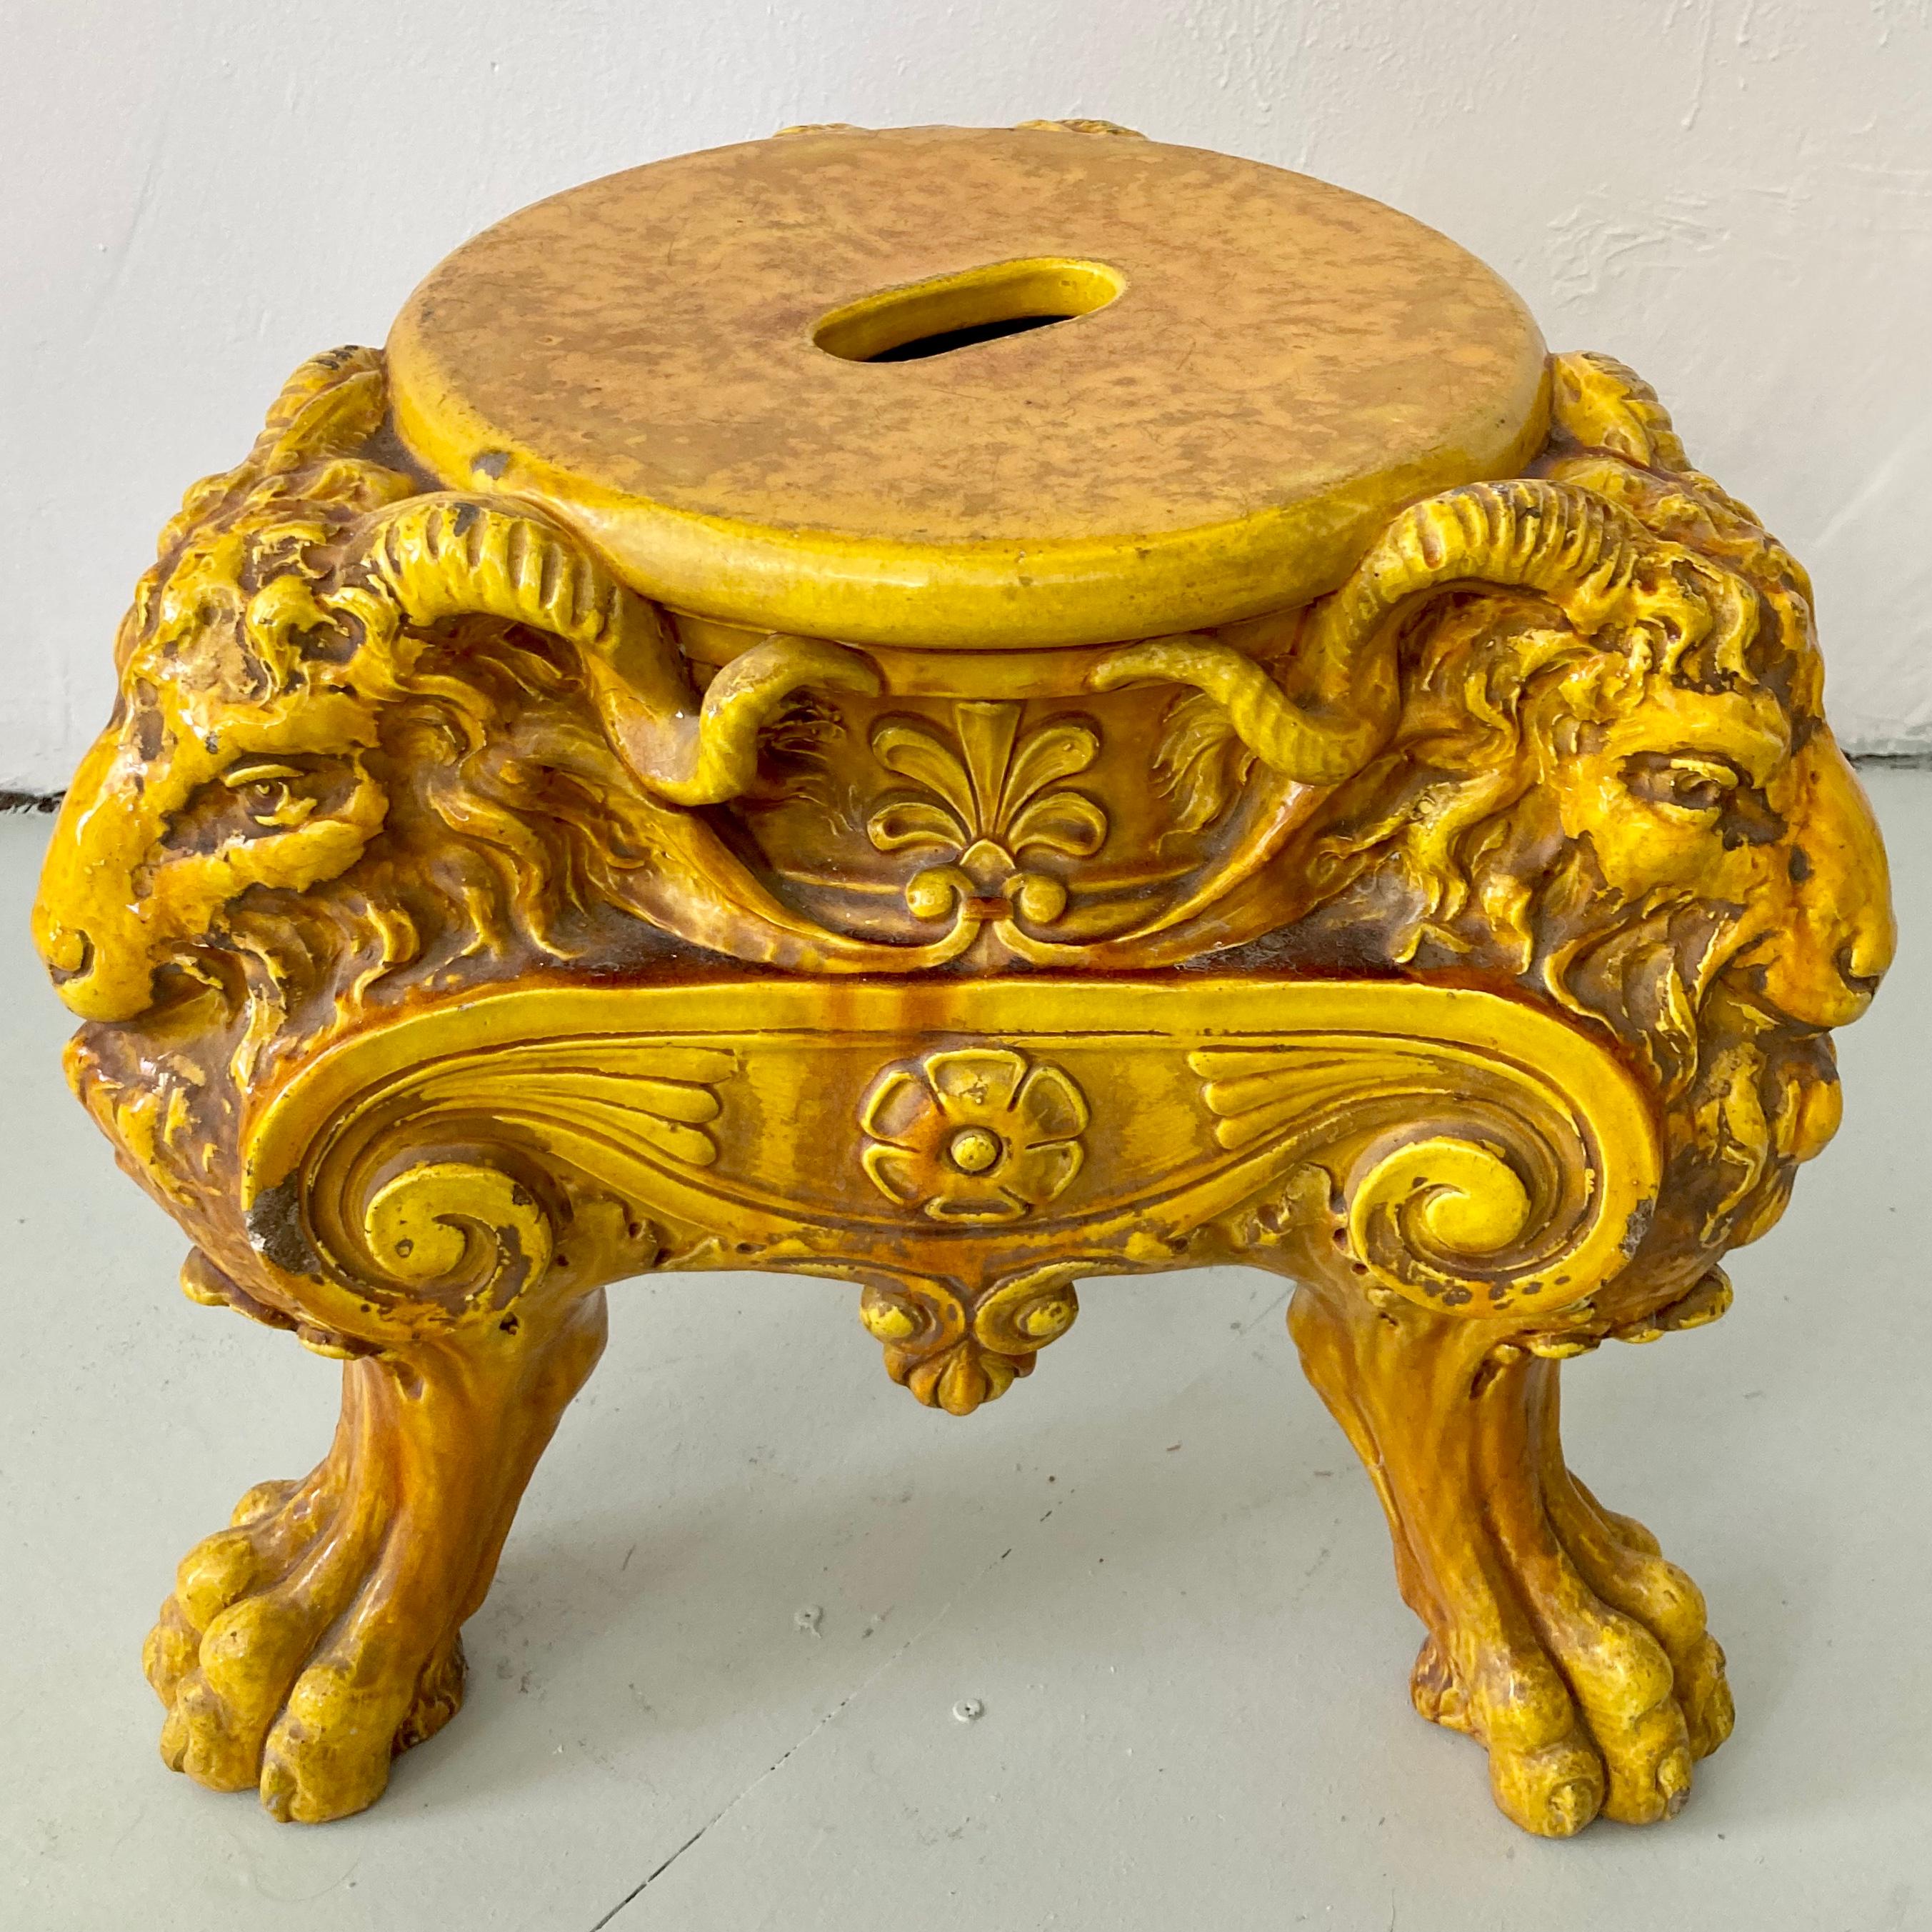 Fabulous terra cotta yellow garden seat with ram motifs. Great quality and detail. Use inside or out and add some European flair to your home . Great architectural details with the design too and the color is amazing. 